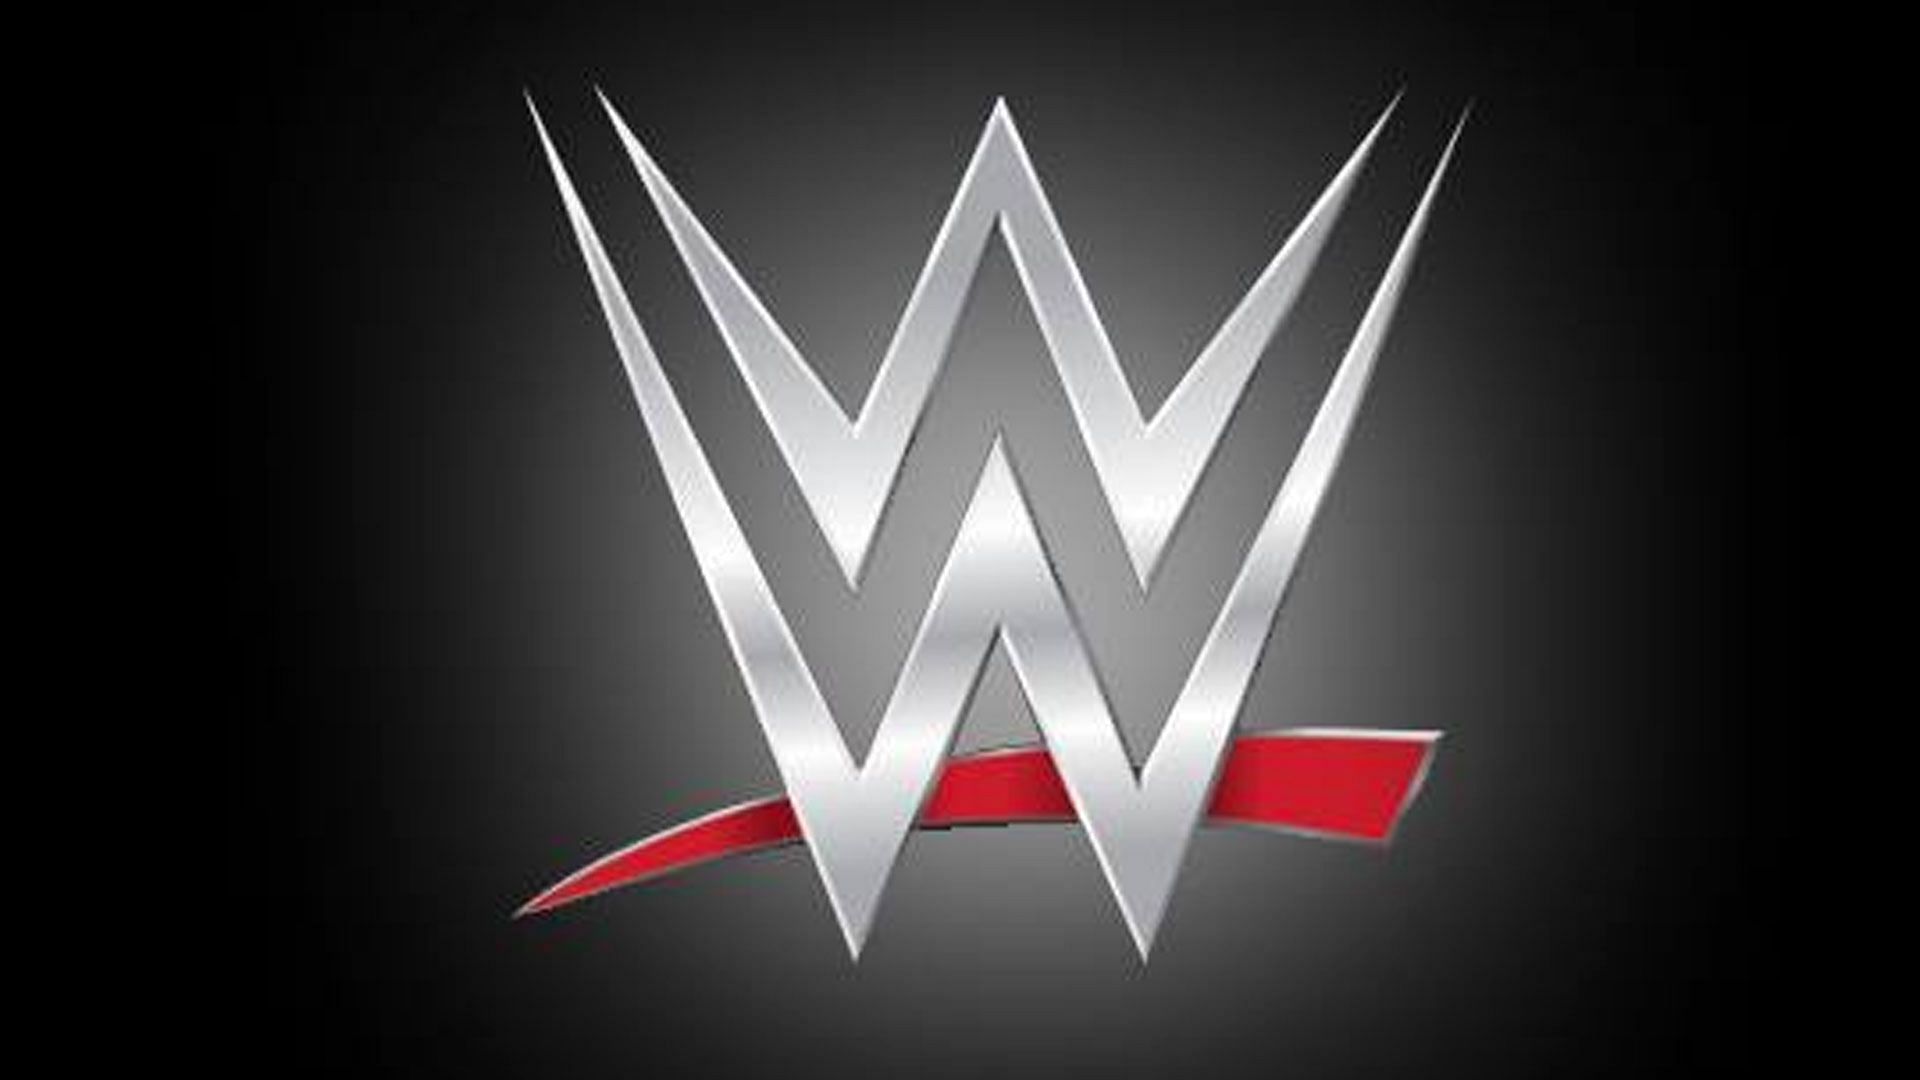 What can fans expect from WWE during the second half of 2022?